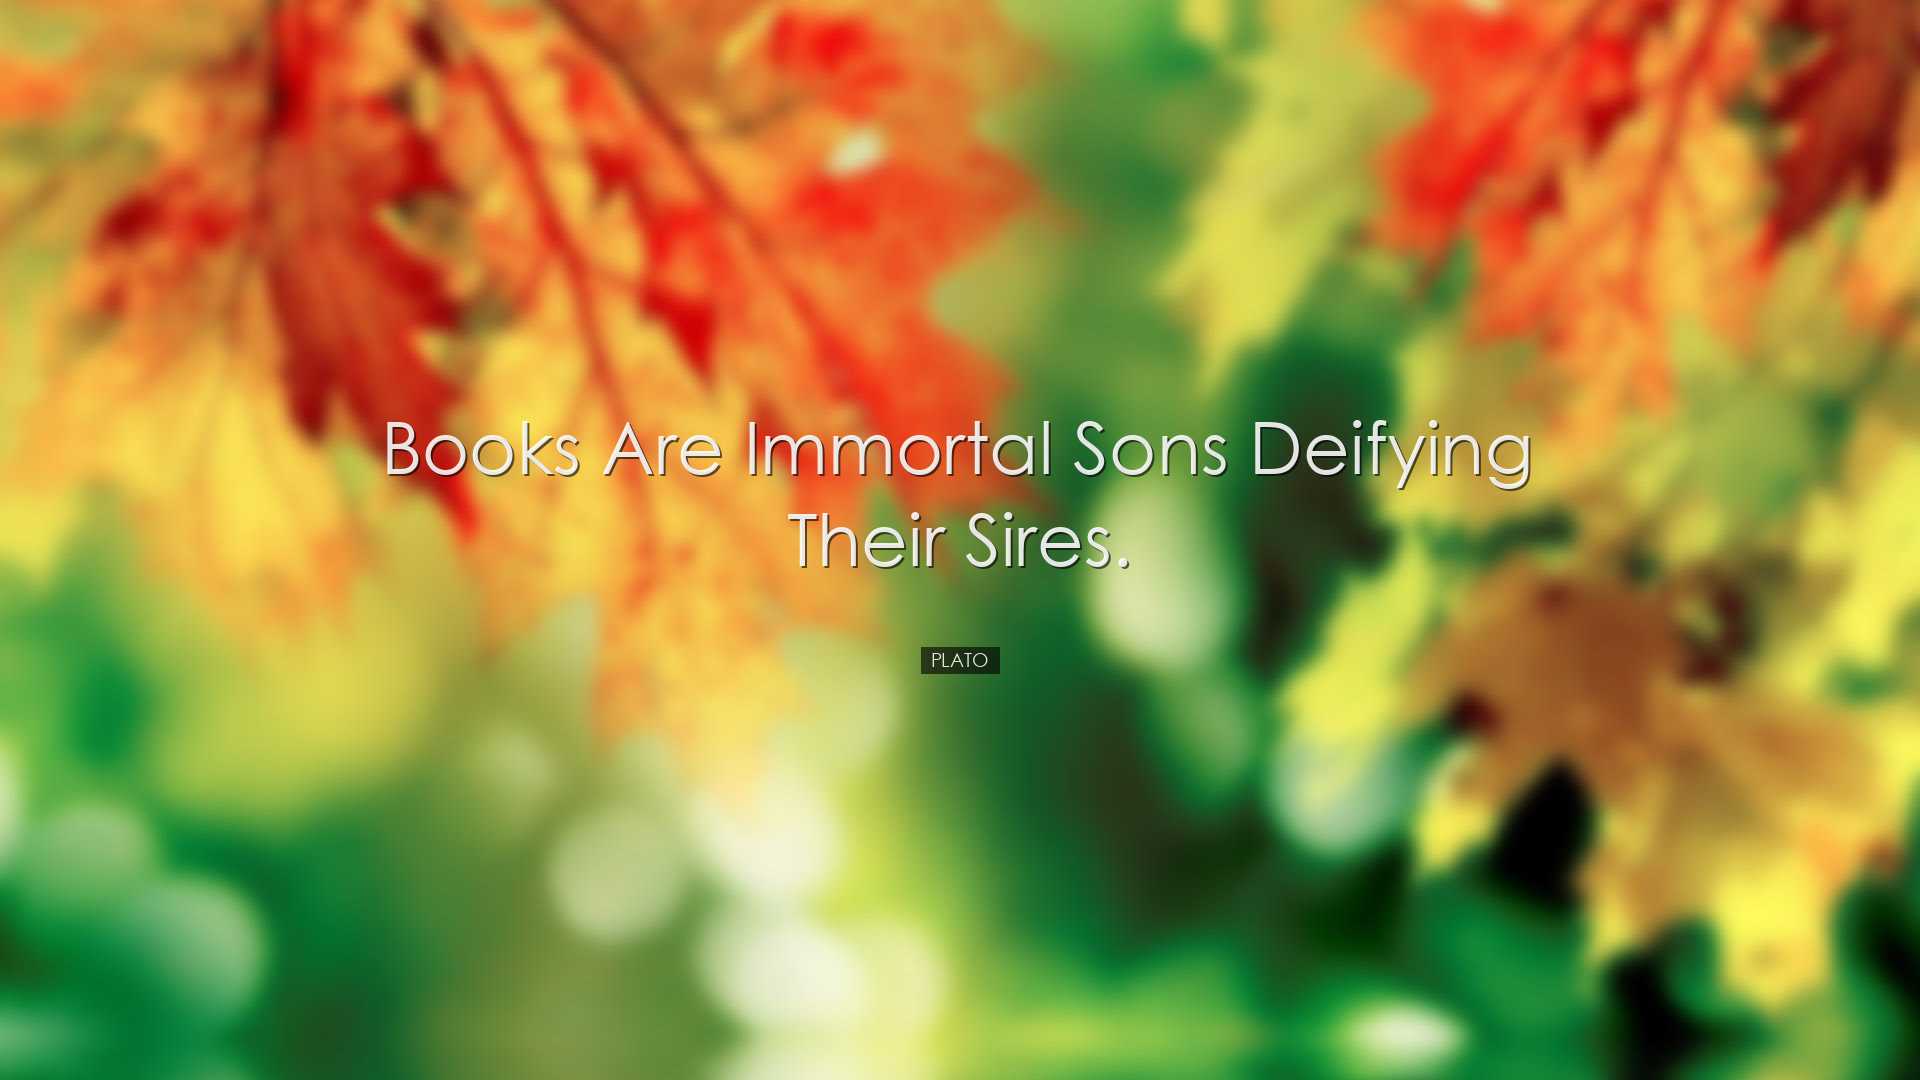 Books are immortal sons deifying their sires. - Plato